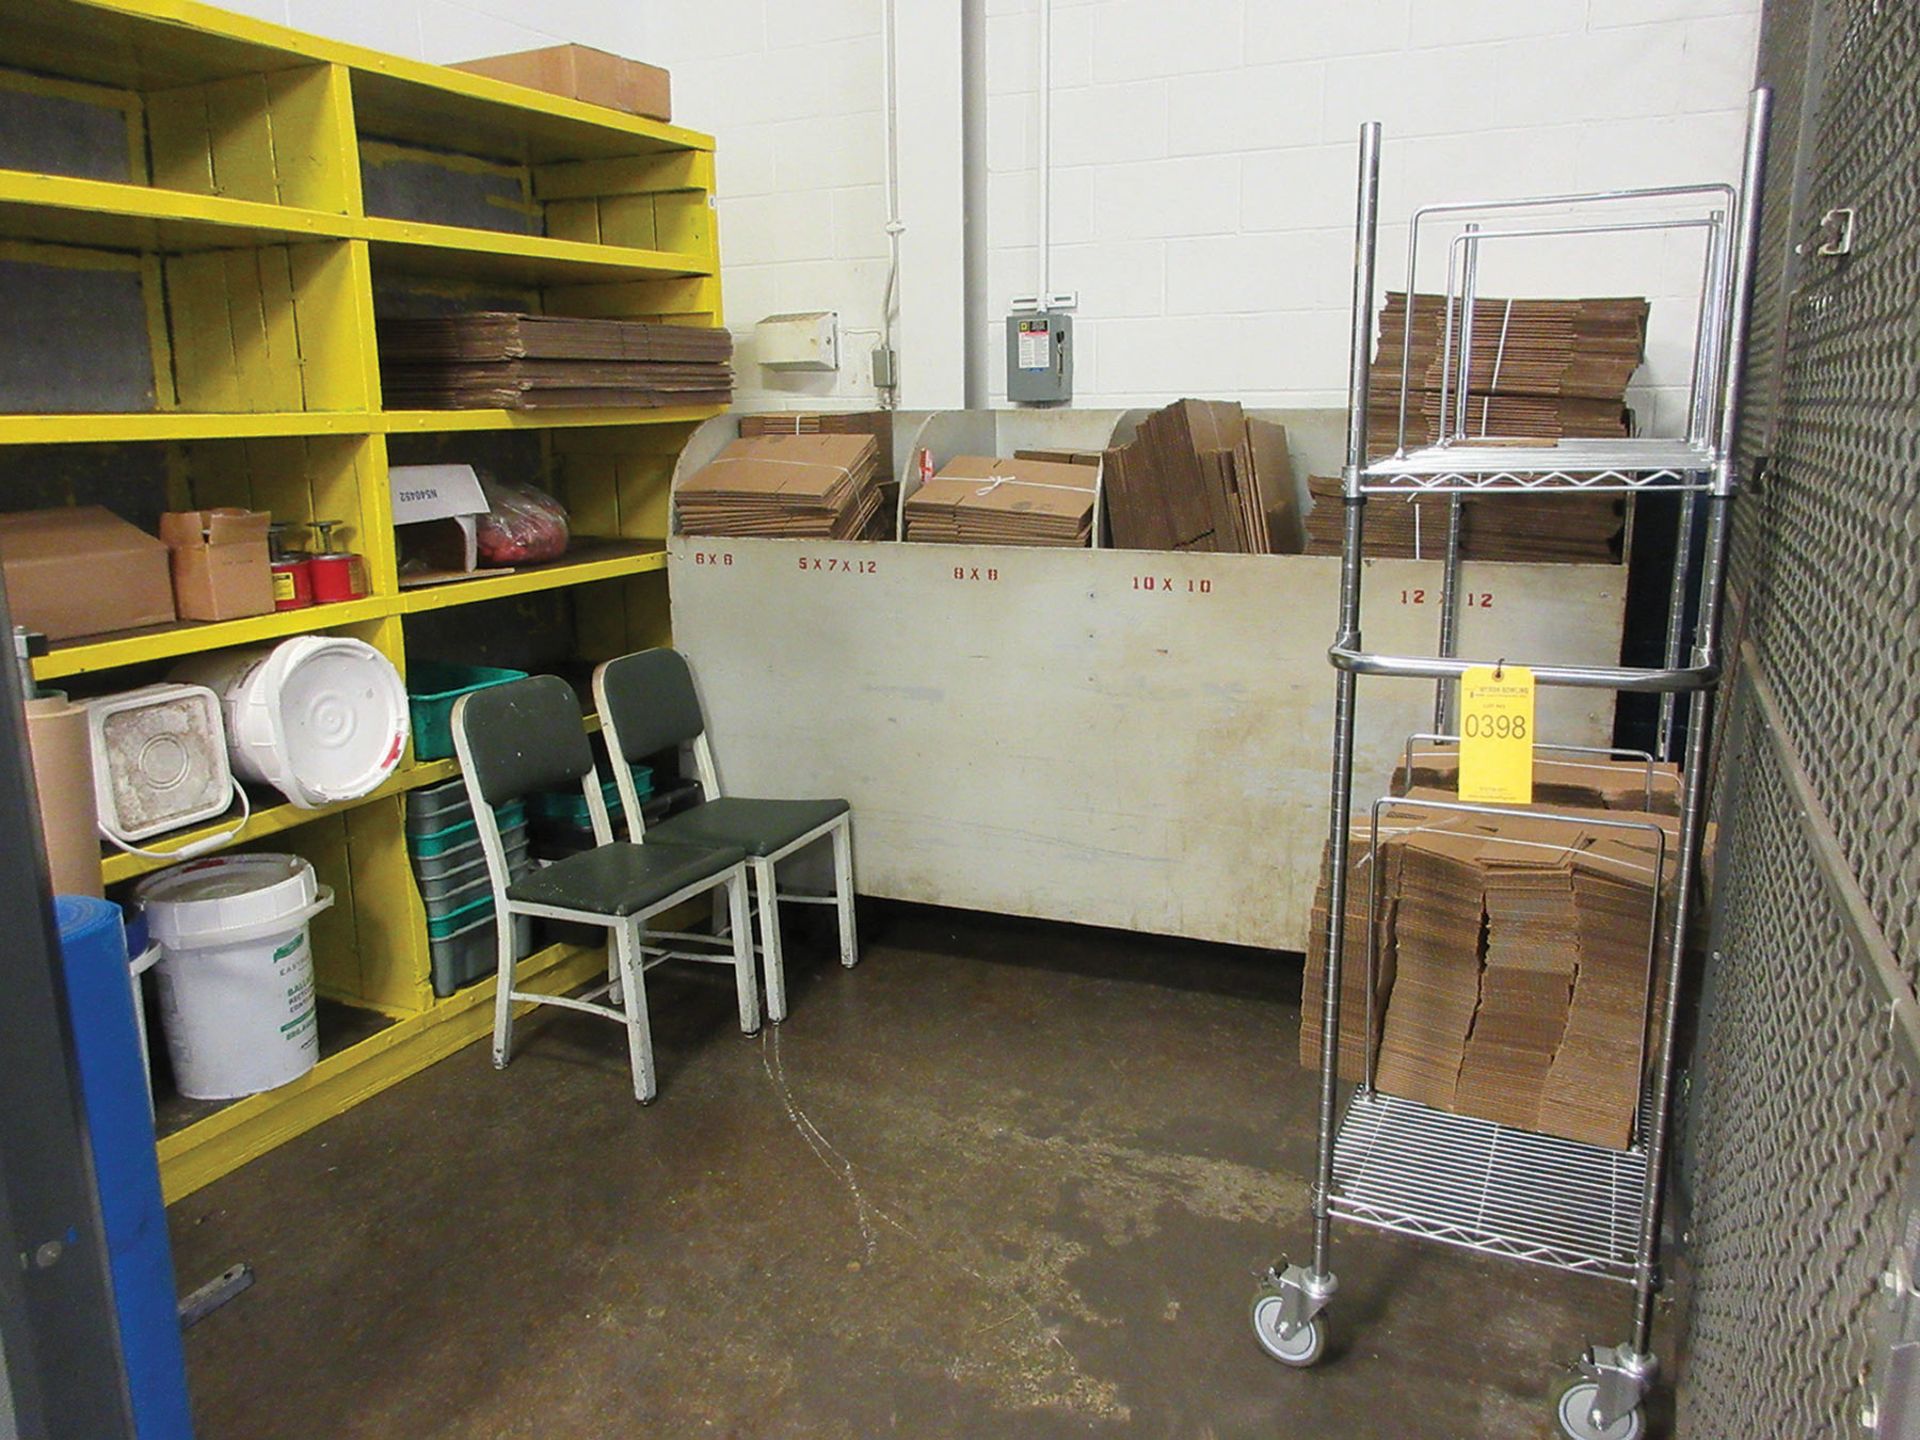 CONTENTS OF CAGE AREA; CARDBOARD BOXES, PLASTIC, AND METRO CART